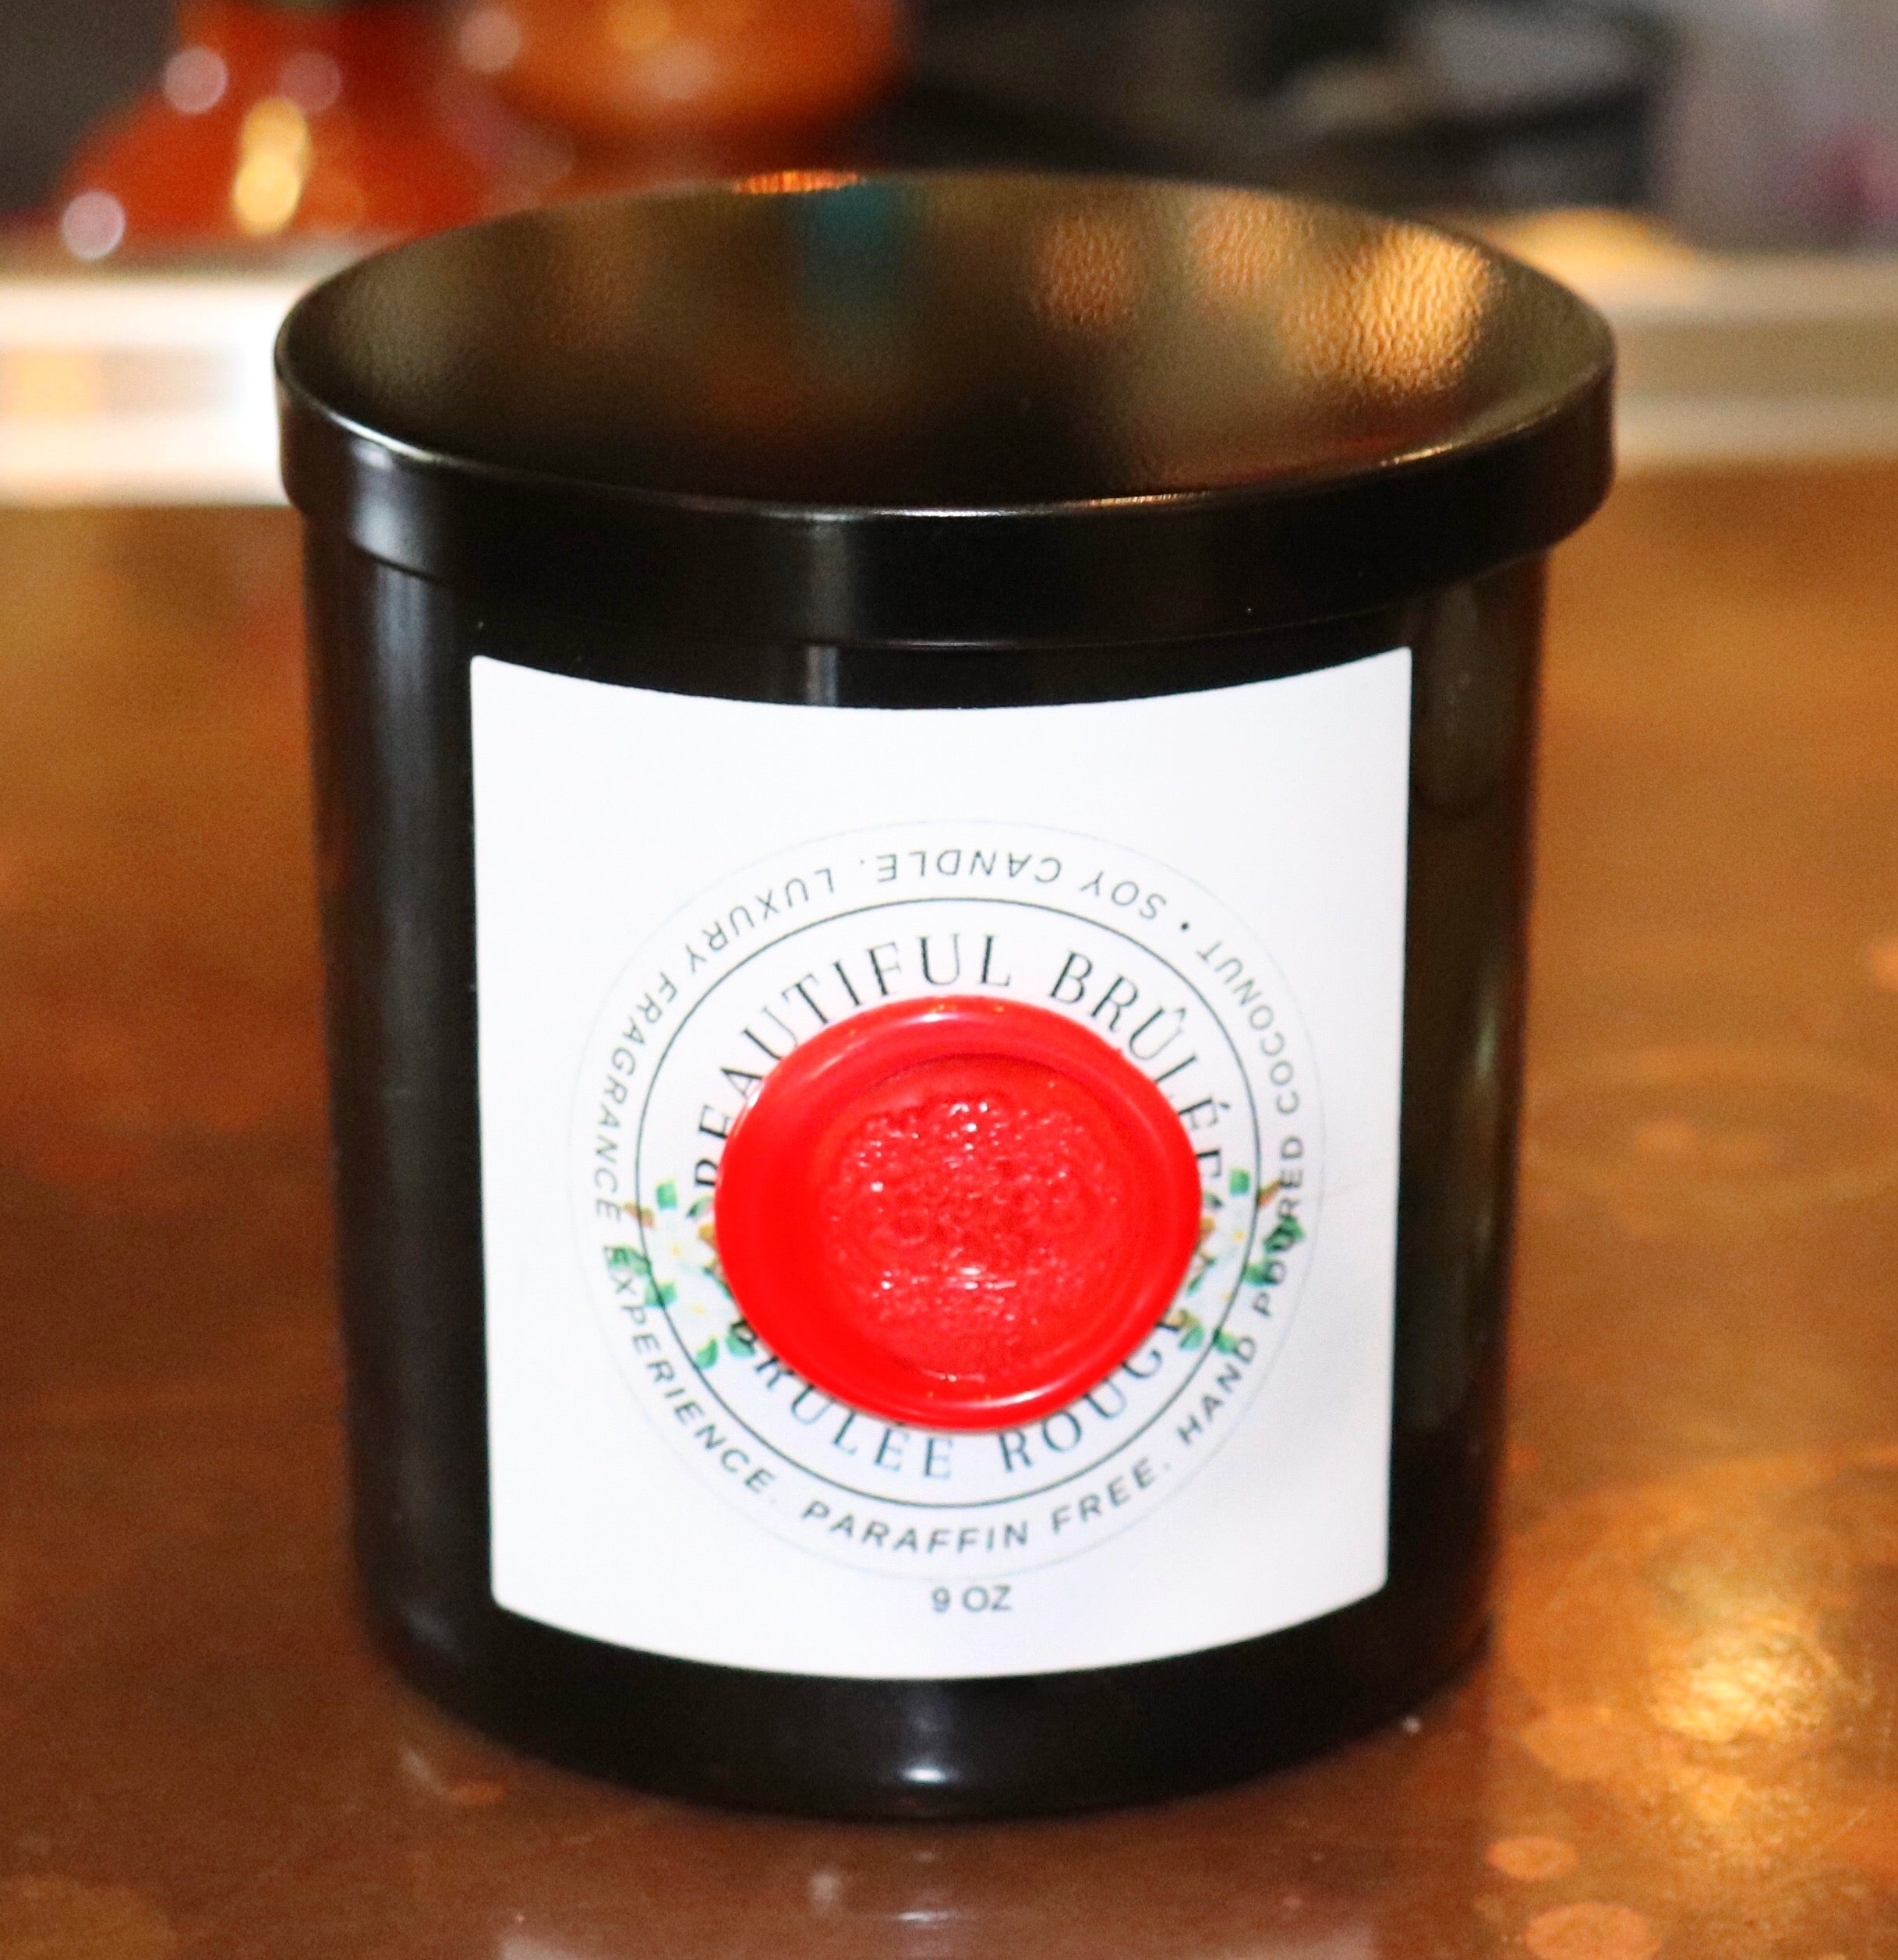 "BRÛLÉE ROUGE" LUXURY SCENTED CANDLE